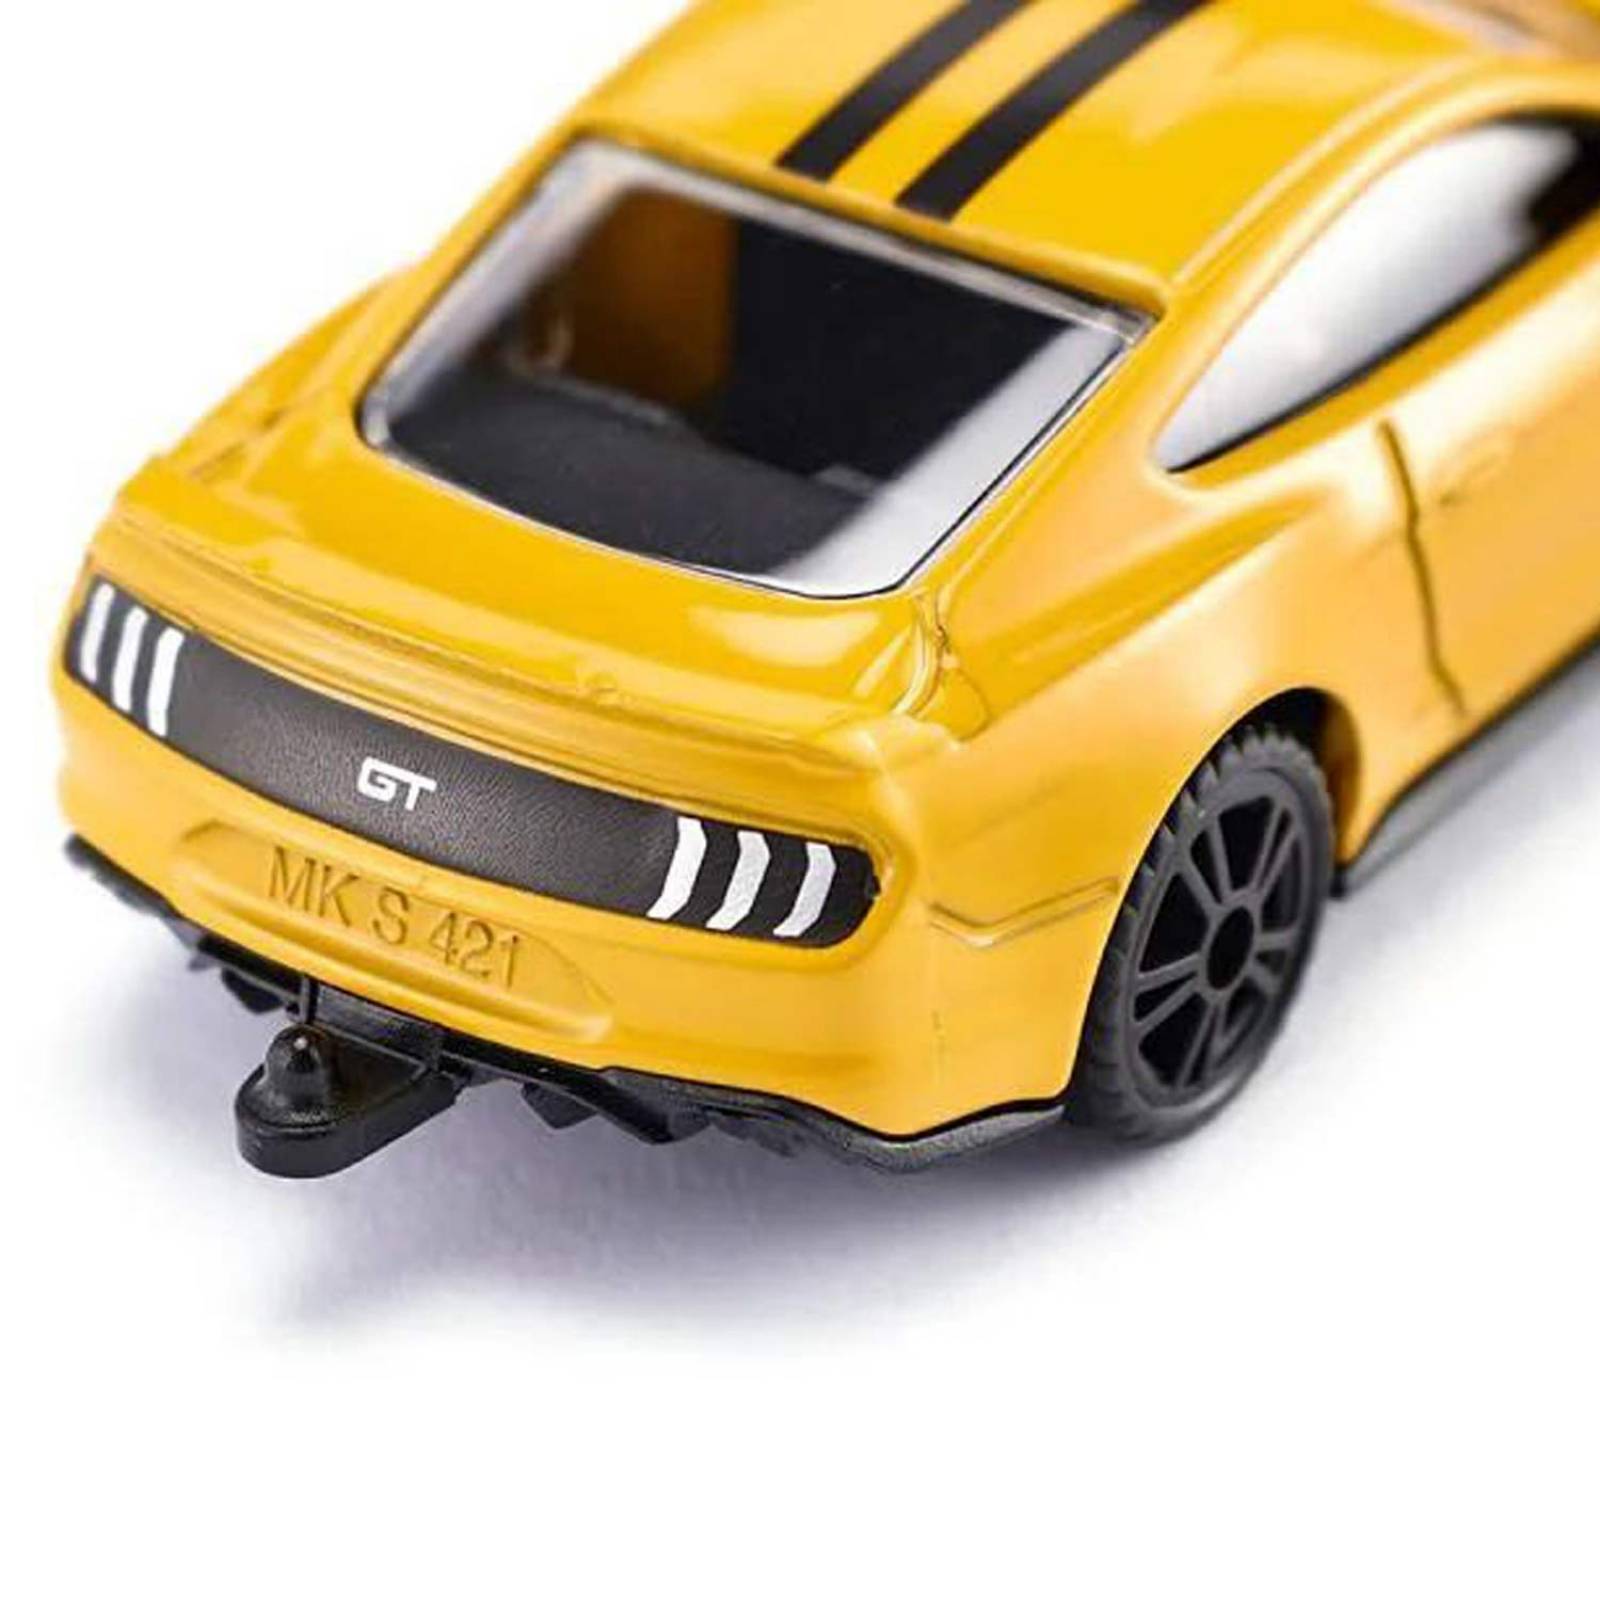 Ford Mustang GT - Single Die-Cast Toy Vehicle 1530 thumbnails